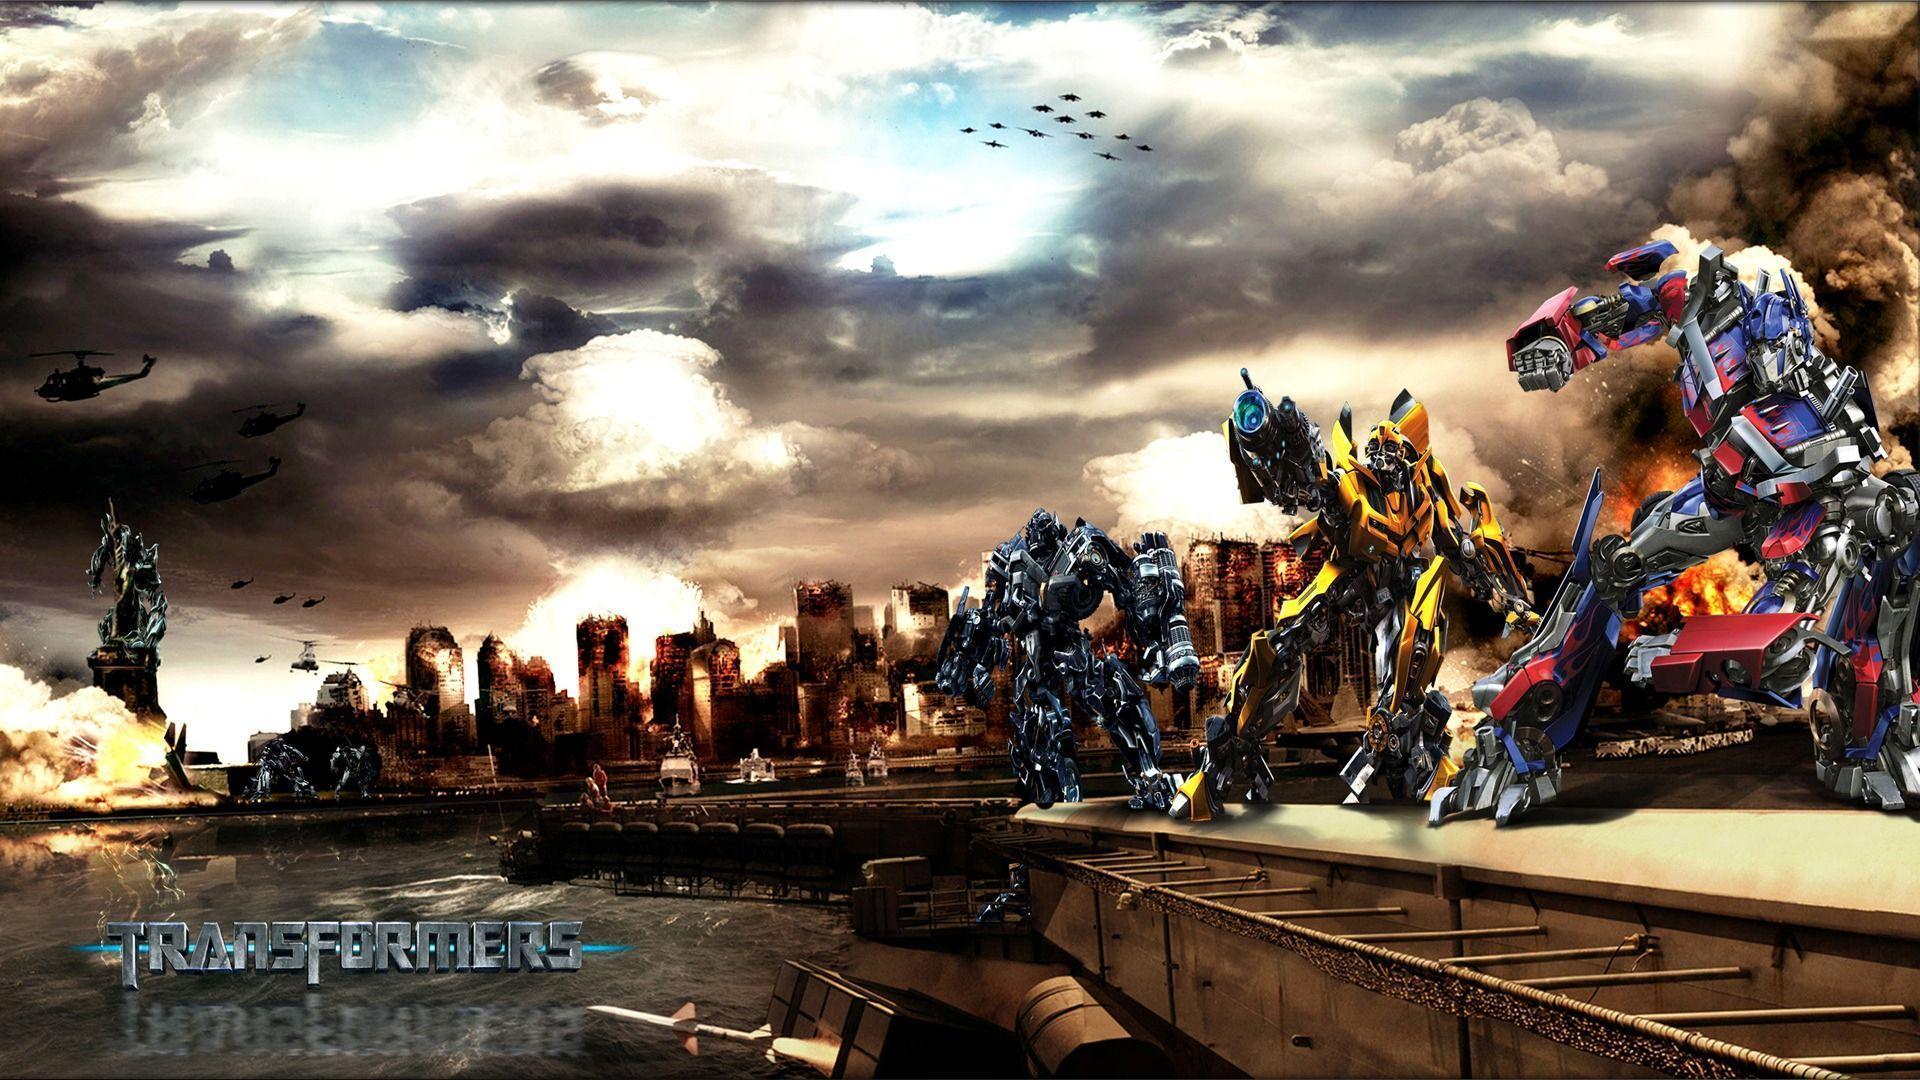 HD Transformers Wallpaper & Background For Free Download